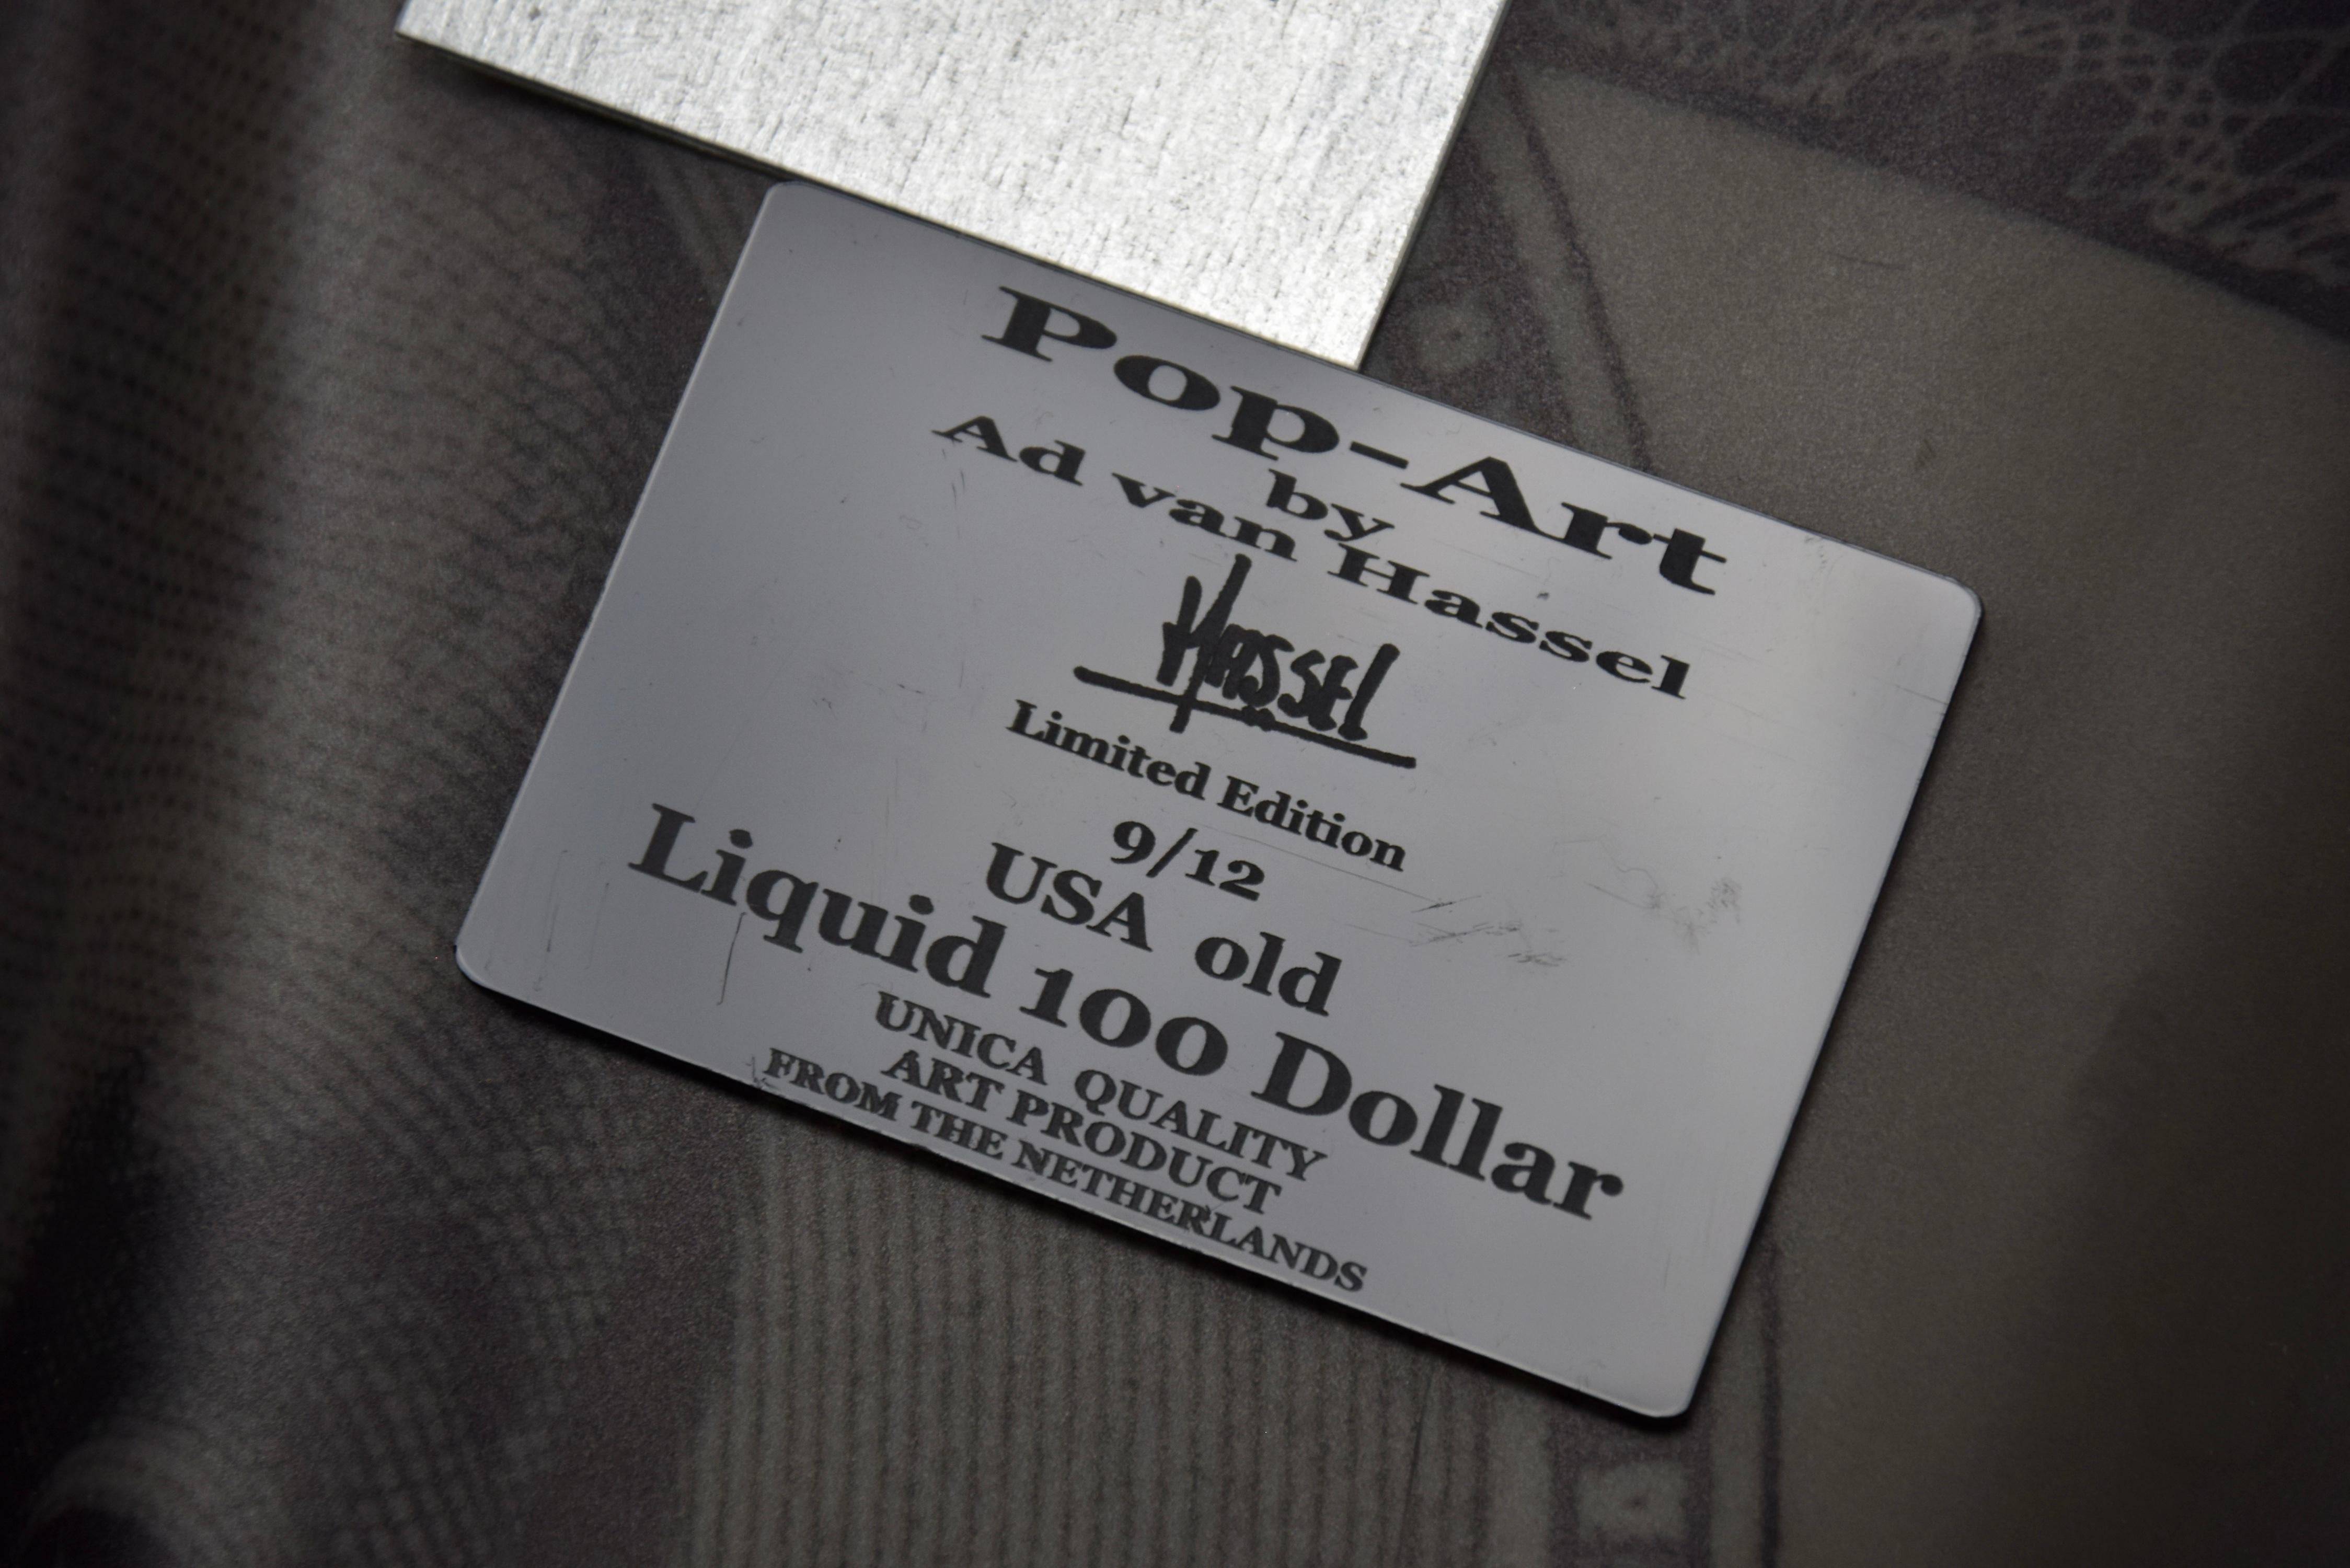 Contemporary Pop Art Limited Edition USA Old Liquid 100 Dollar For Sale